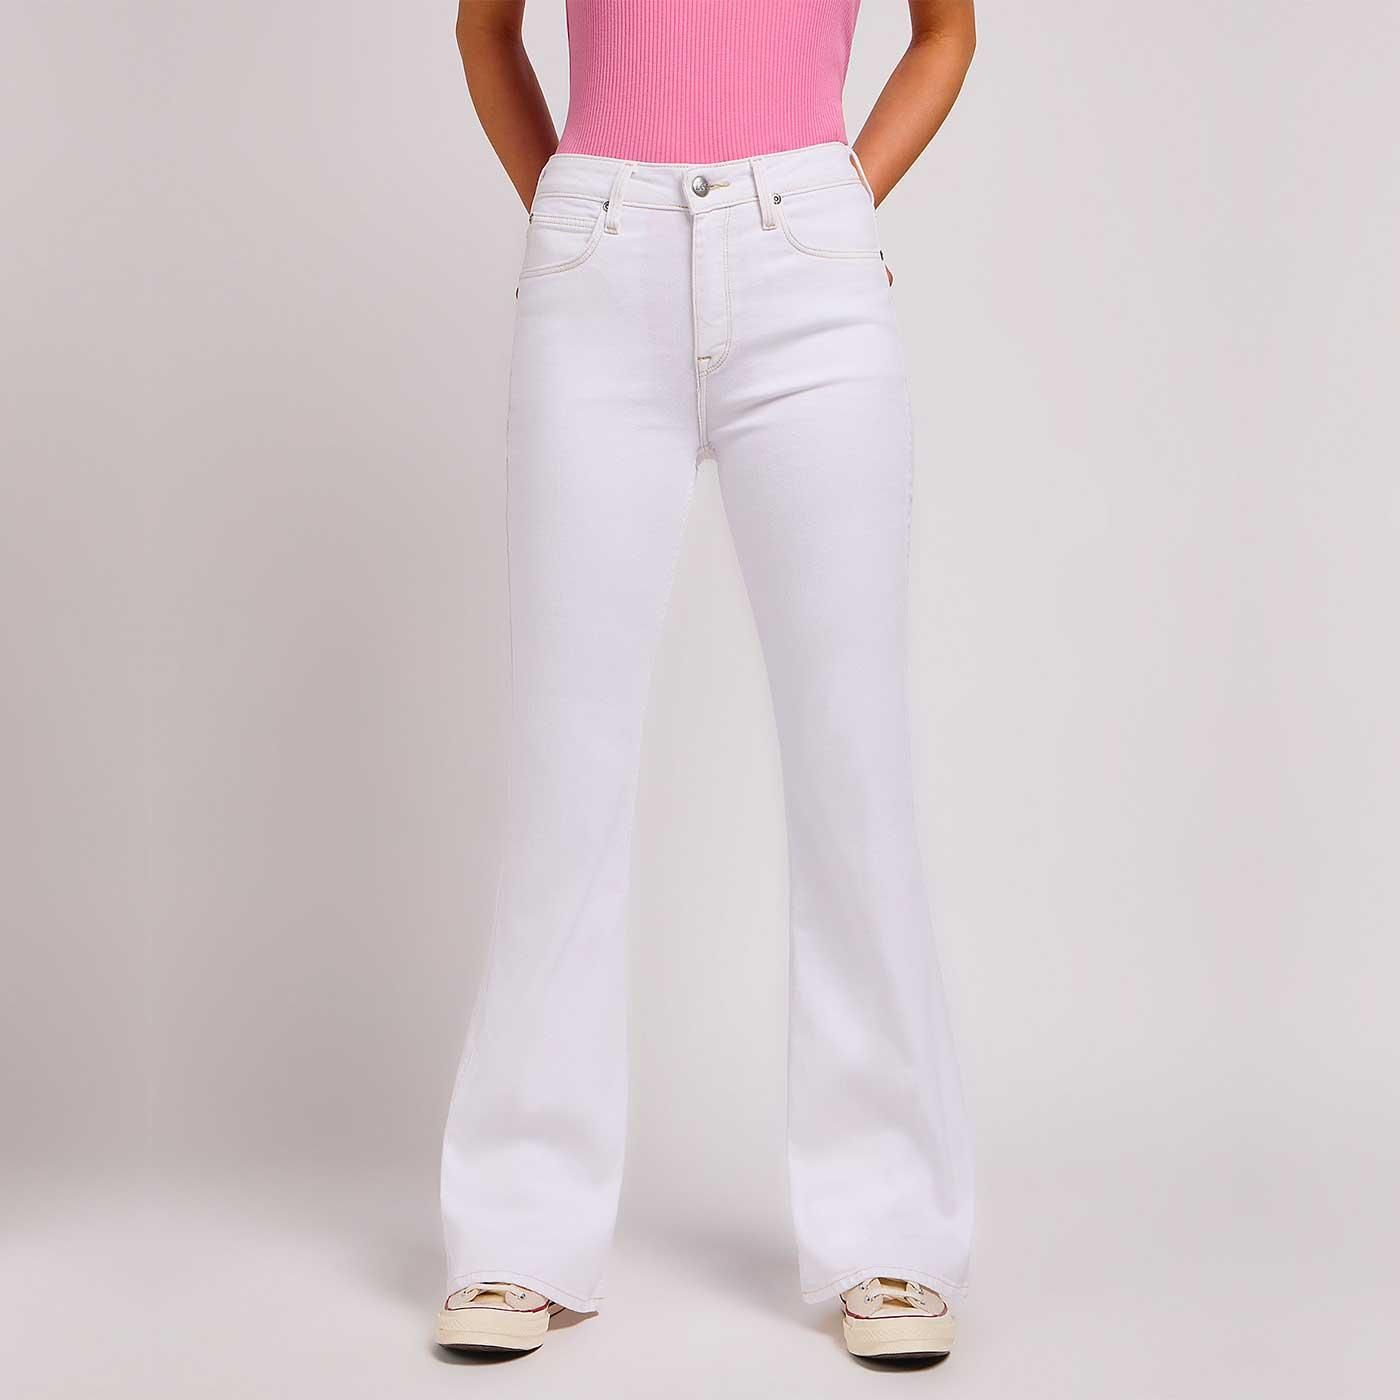 Breese Lee Retro 70s White Slim Fit Flared Jeans 